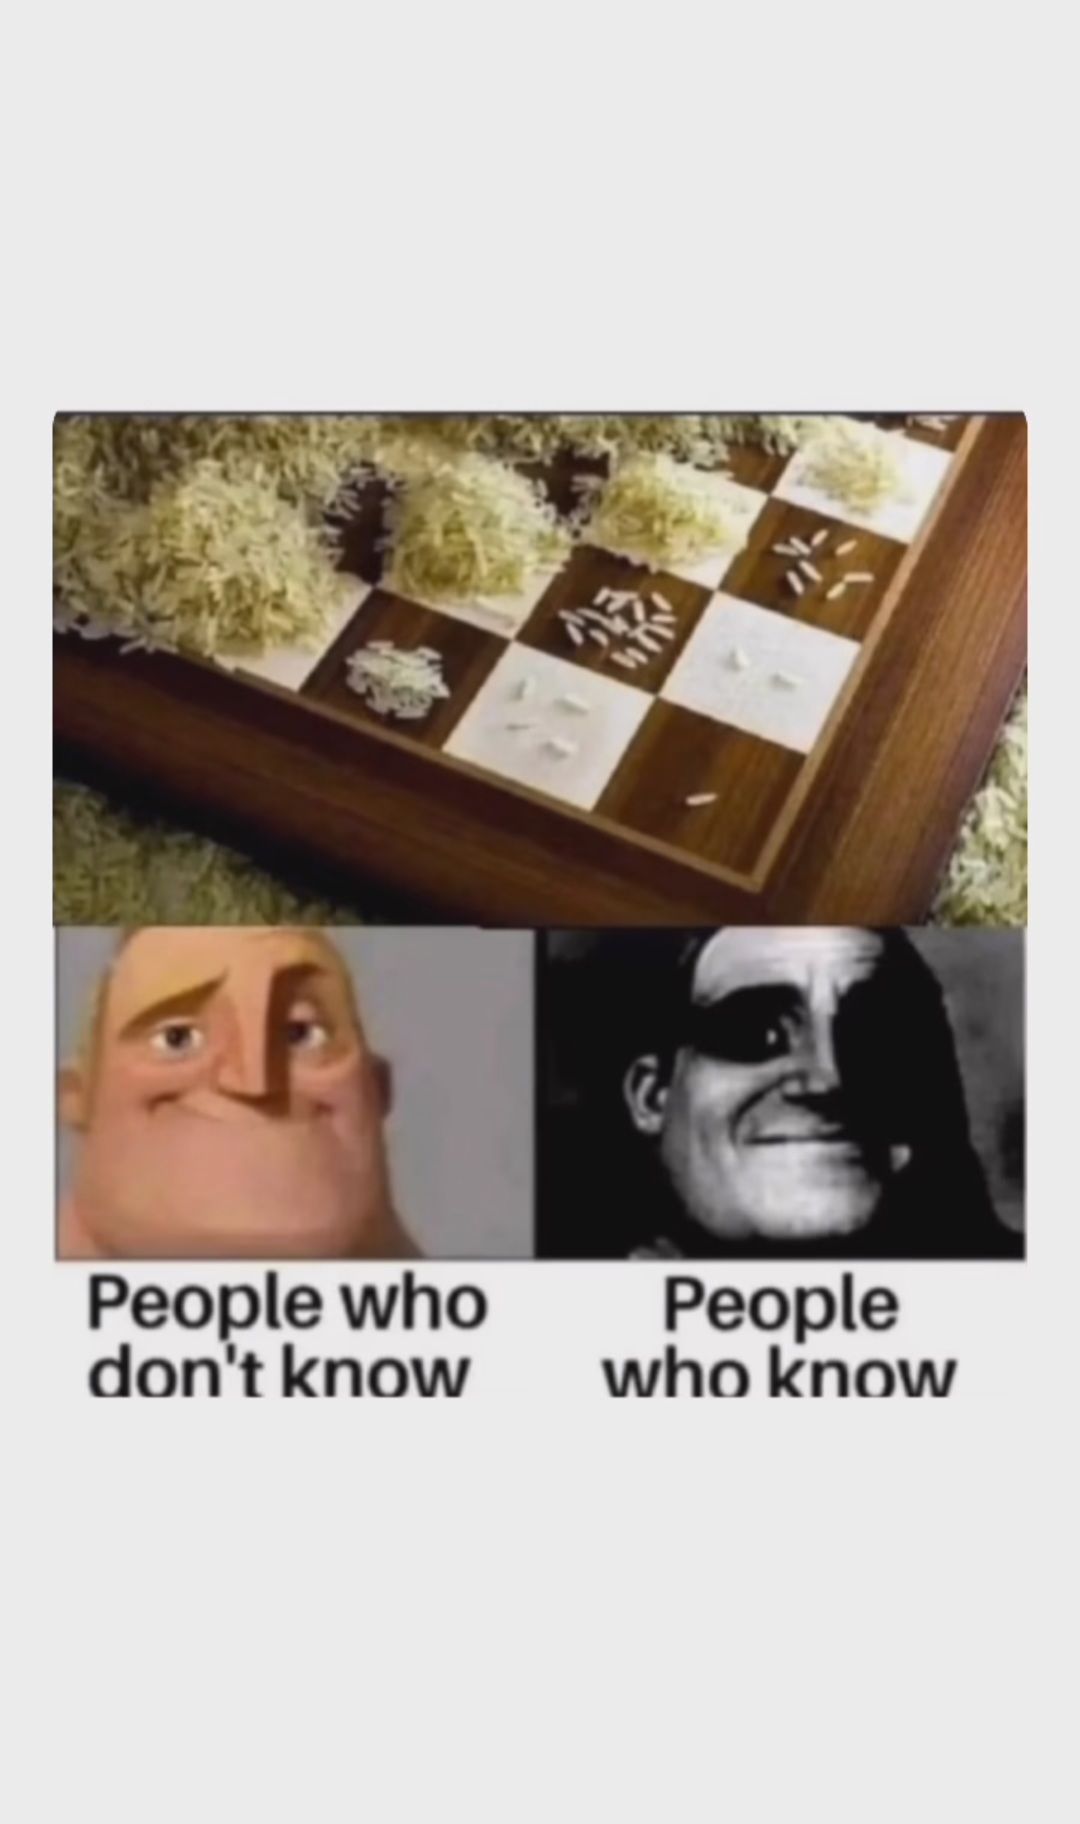 People who
don't know
People
who know